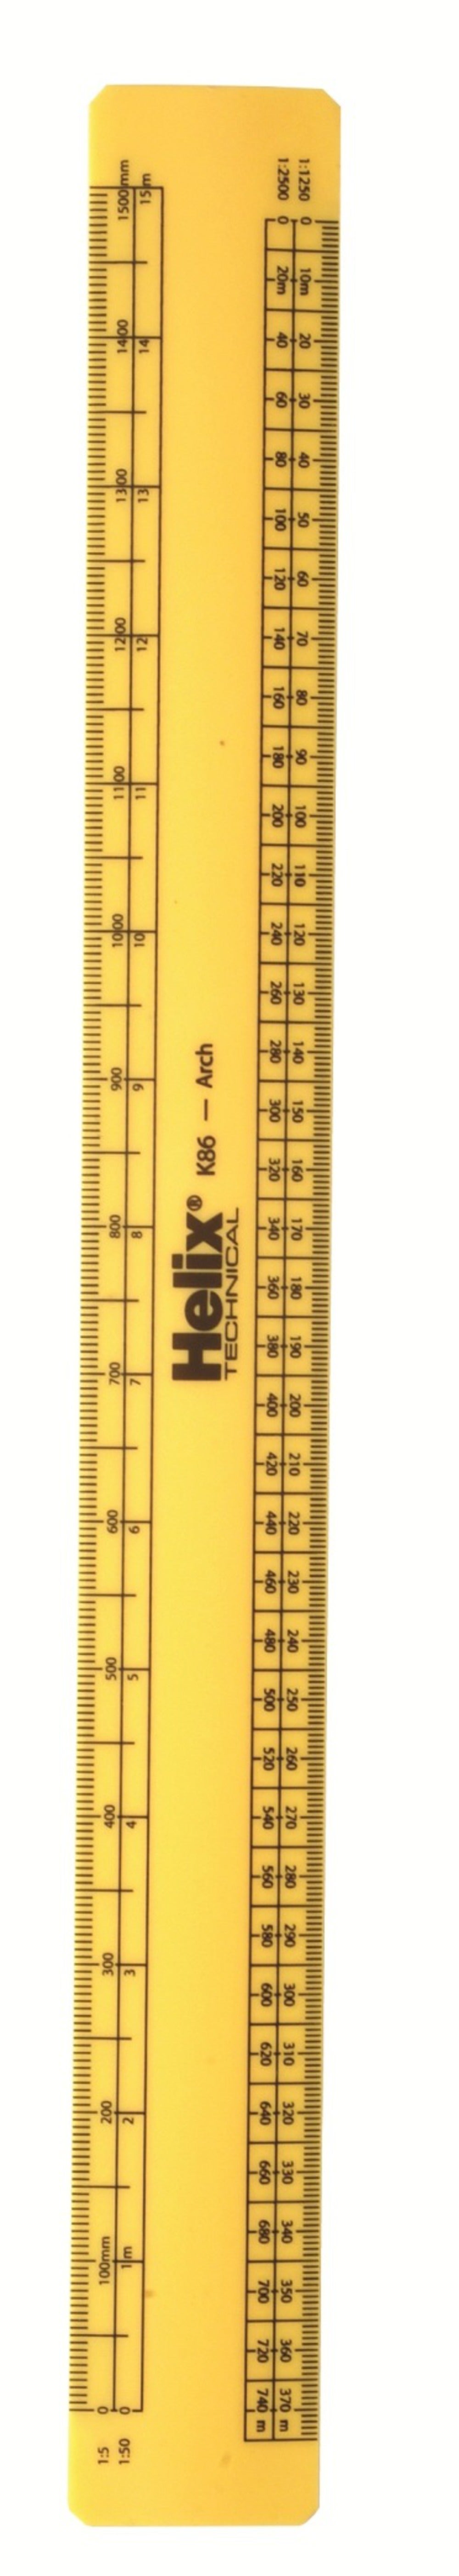 little markings on architect rulers